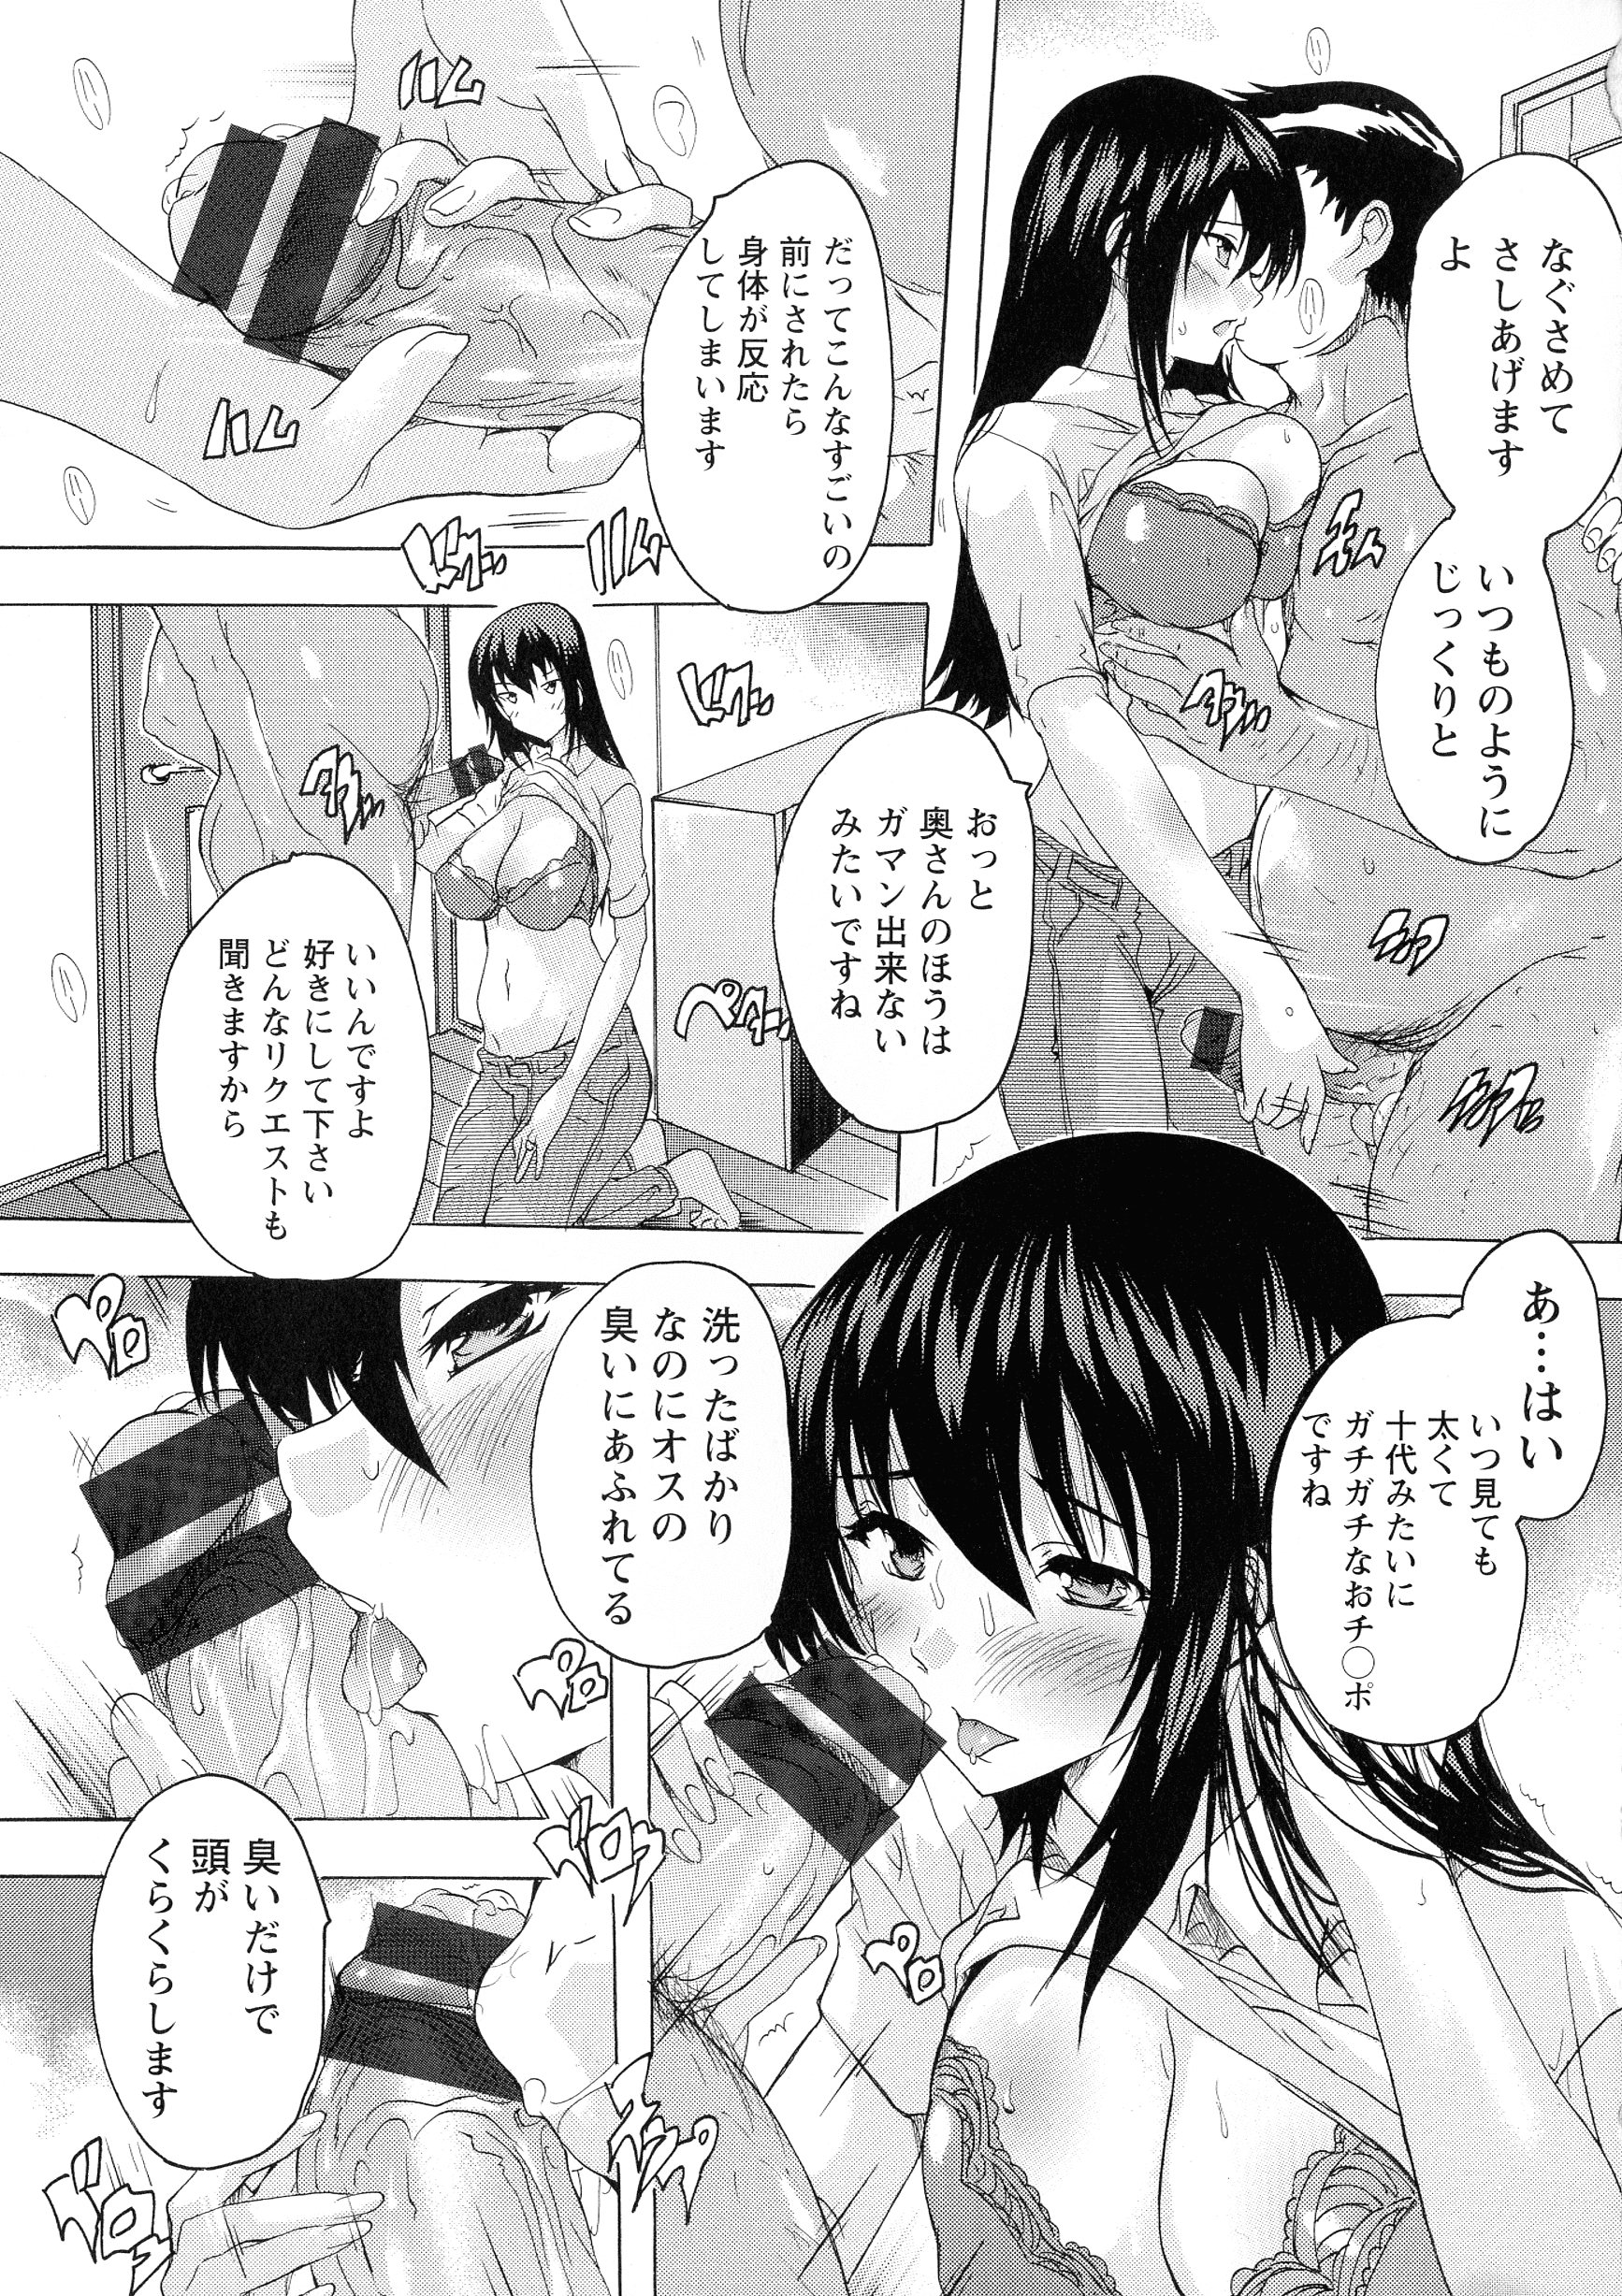 051 page 051 1 05 MB